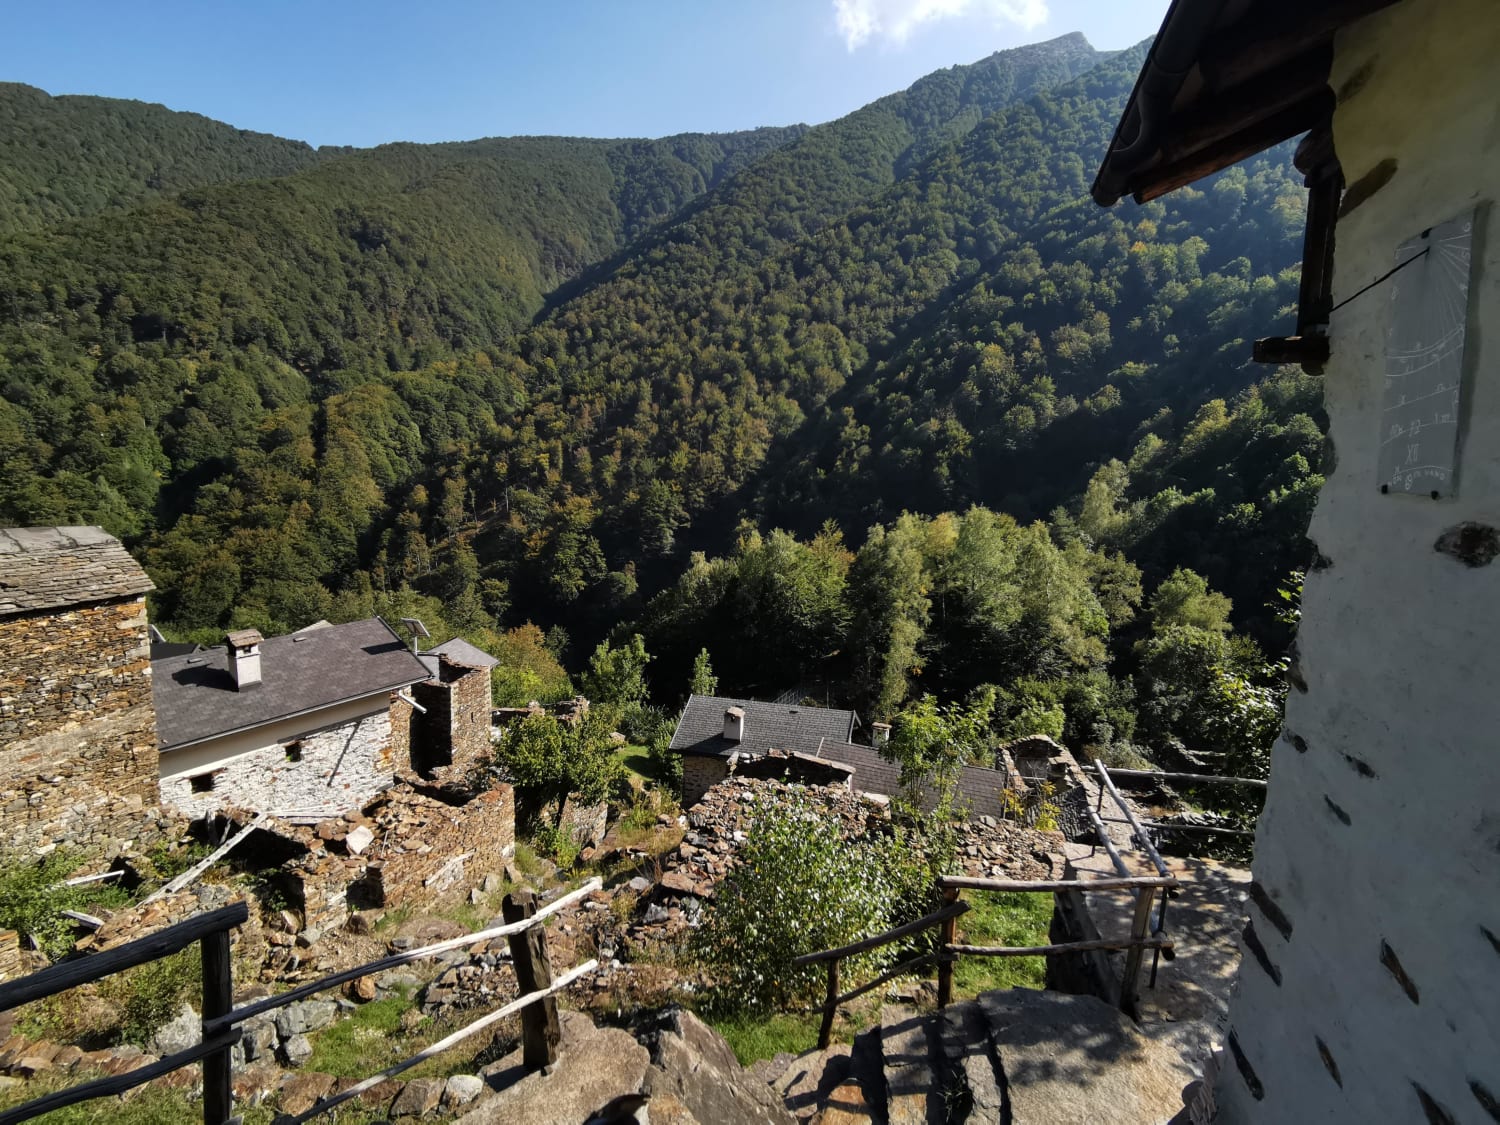 Abandoned village in the Italian alps. Was a pretty awesome hike.